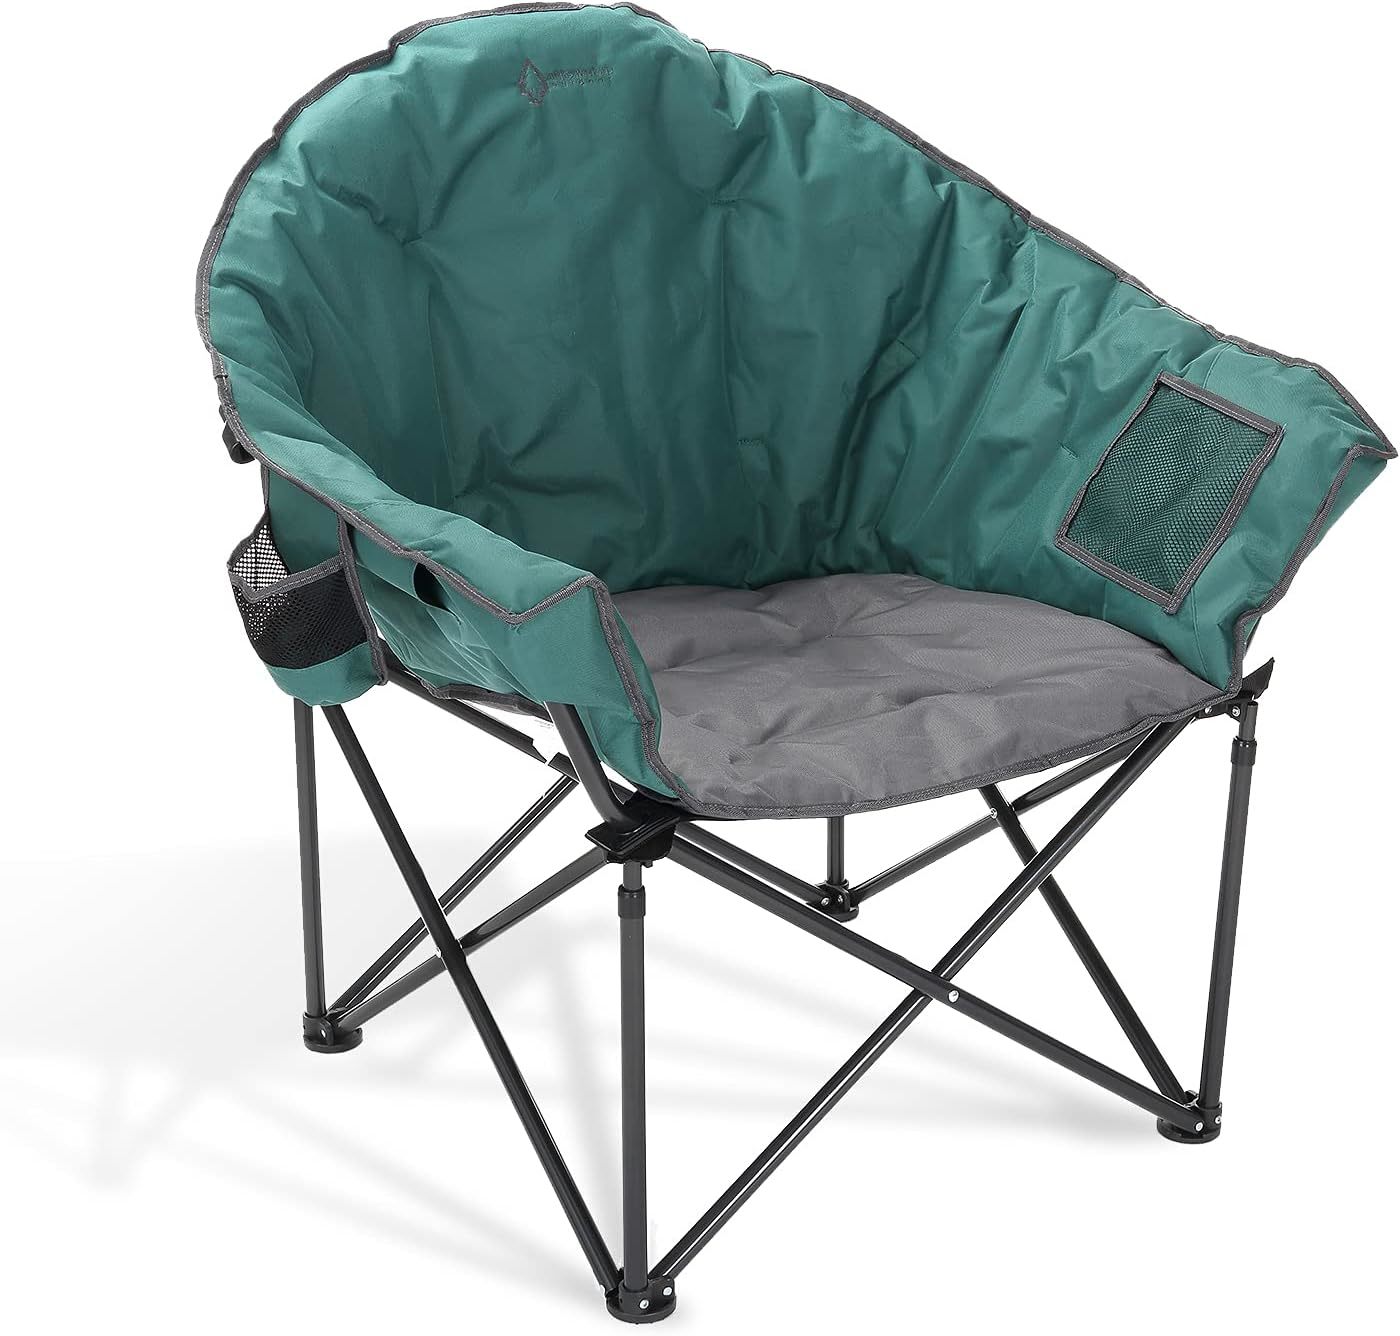 Primary image for Arrowhead Outdoor Oversized Heavy-Duty Club Folding Camping, Based Support.